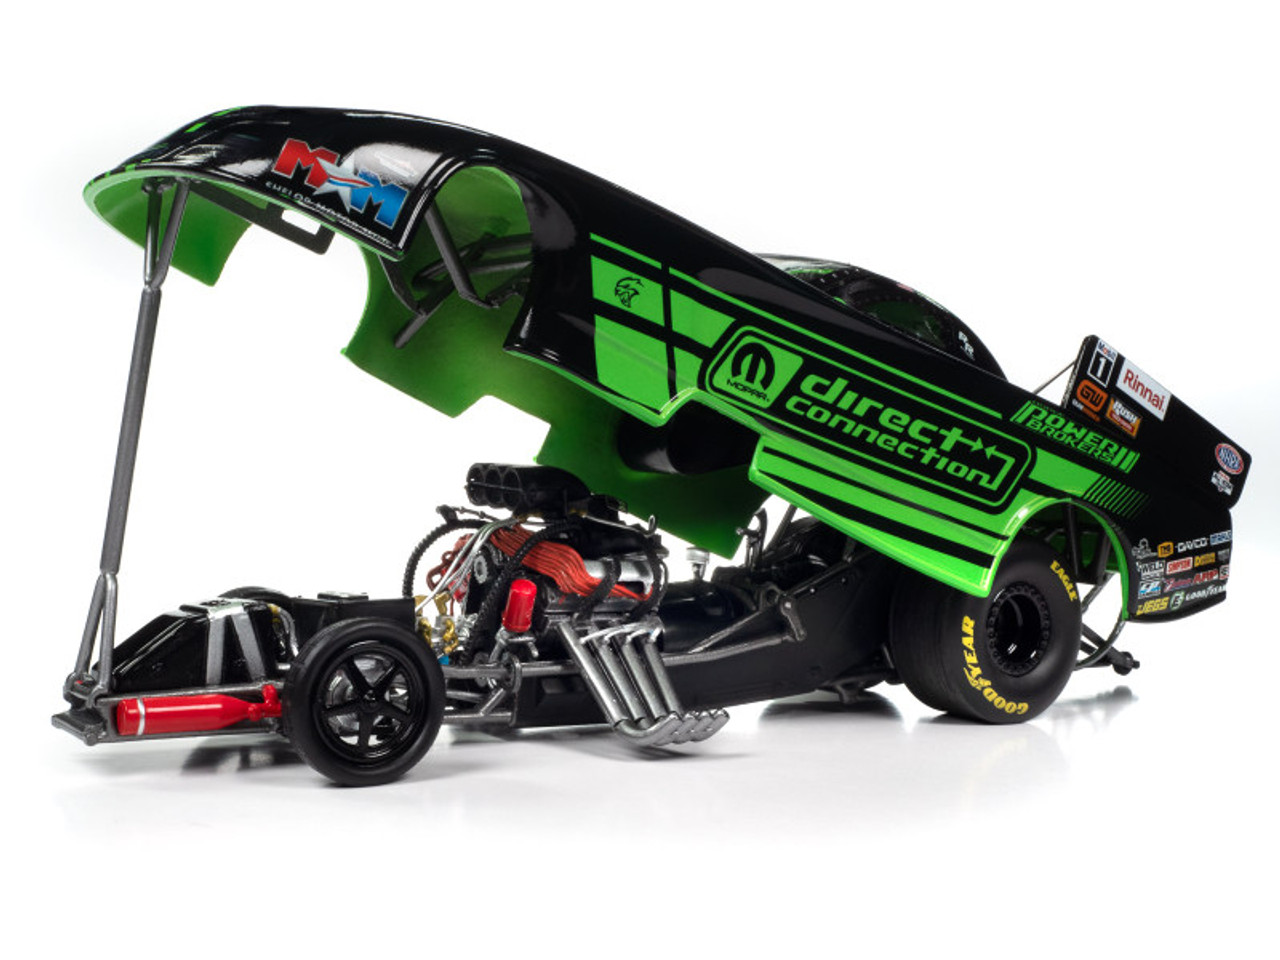 Dodge Charger SRT Hellcat NHRA Funny Car Matt Hagan "MOPAR - Direct Connection" (2023) "Tony Stewart Racing" Limited Edition to 1008 pieces Worldwide 1/24 Diecast Model Car by Auto World